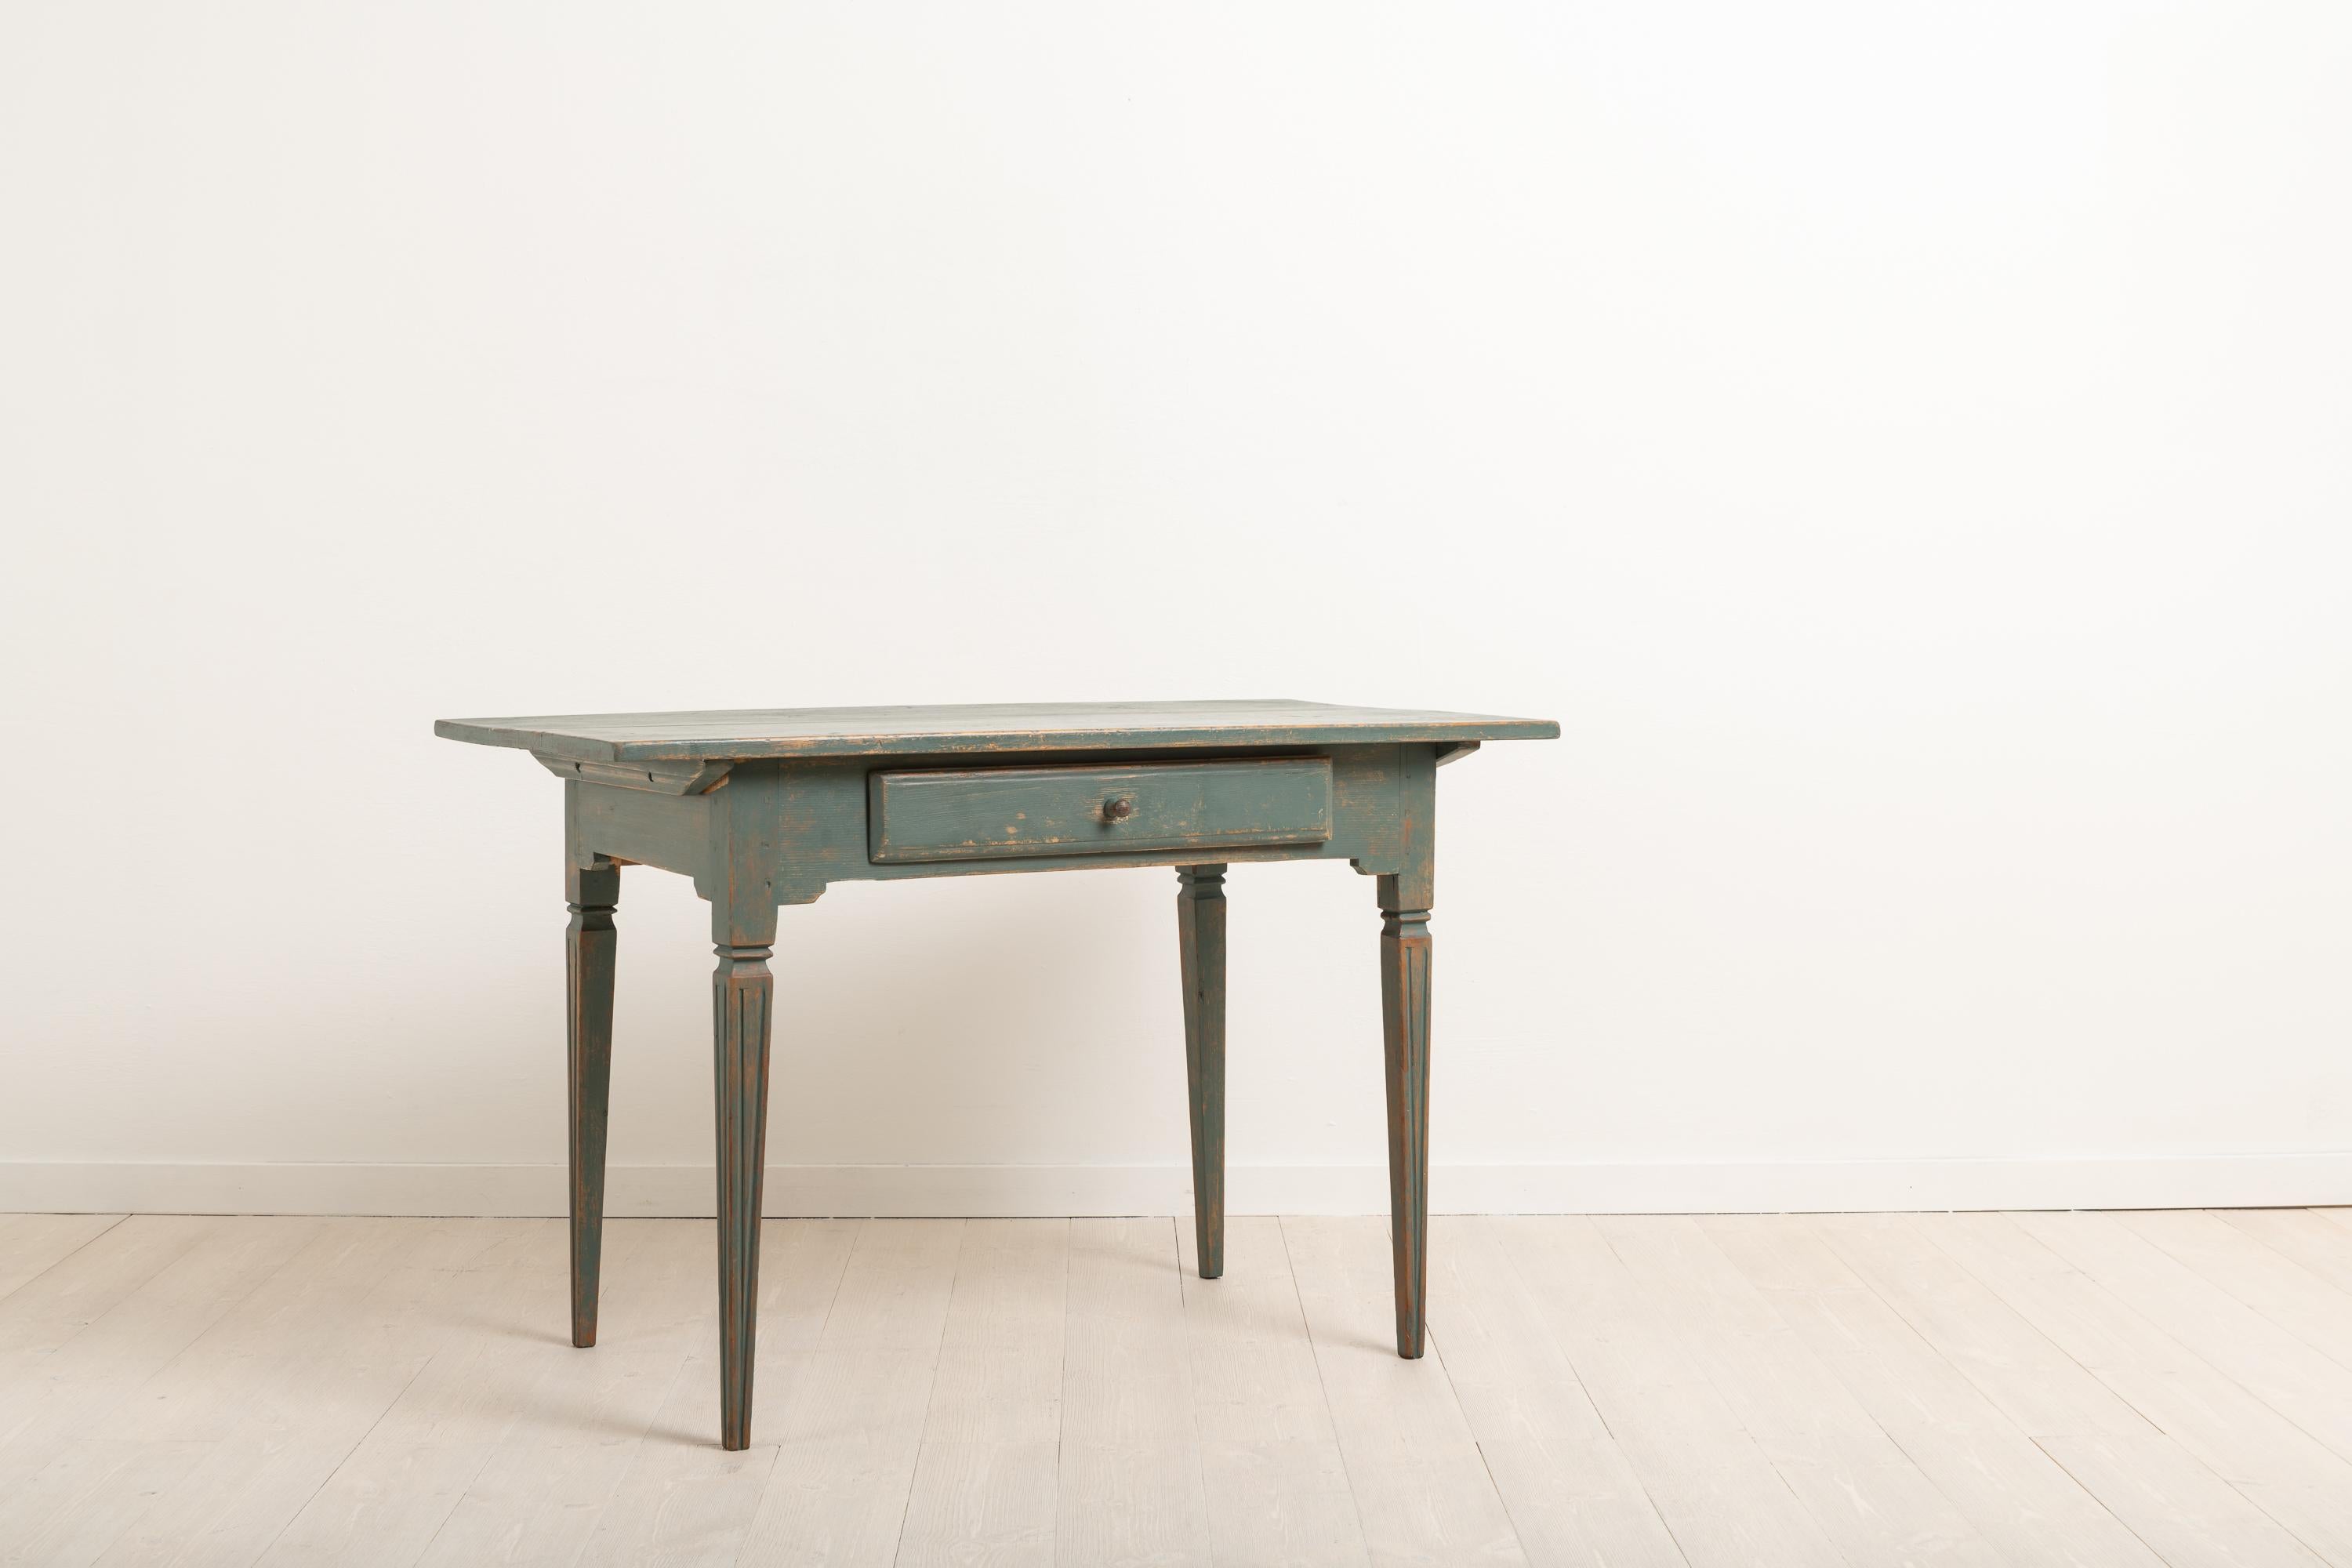 Gustavian side table with straight tapered legs. The legs are decorated with flutes. Distressed dark green paint. The table has a single drawer which has its original wooden knob. Manufactured around 1810-1820 in northern Sweden. The side table is